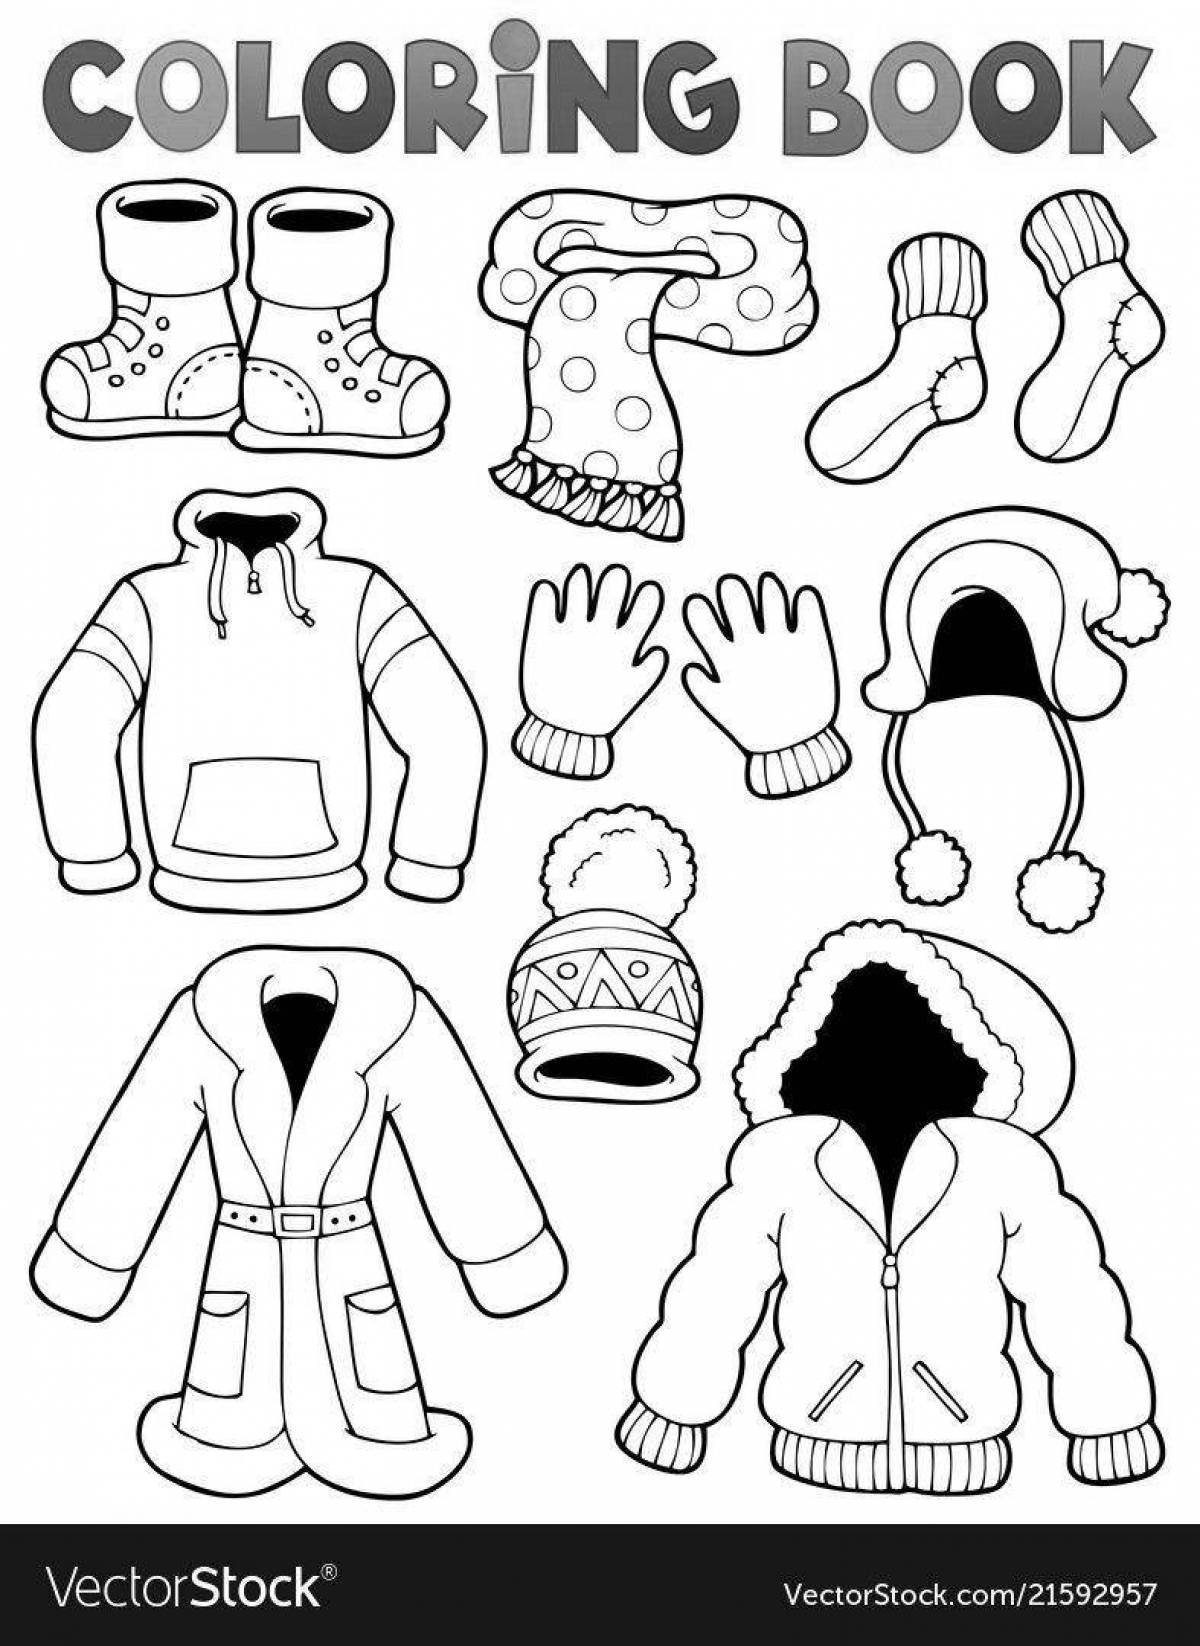 Fabulous winter clothes coloring pages for 3-4 year olds